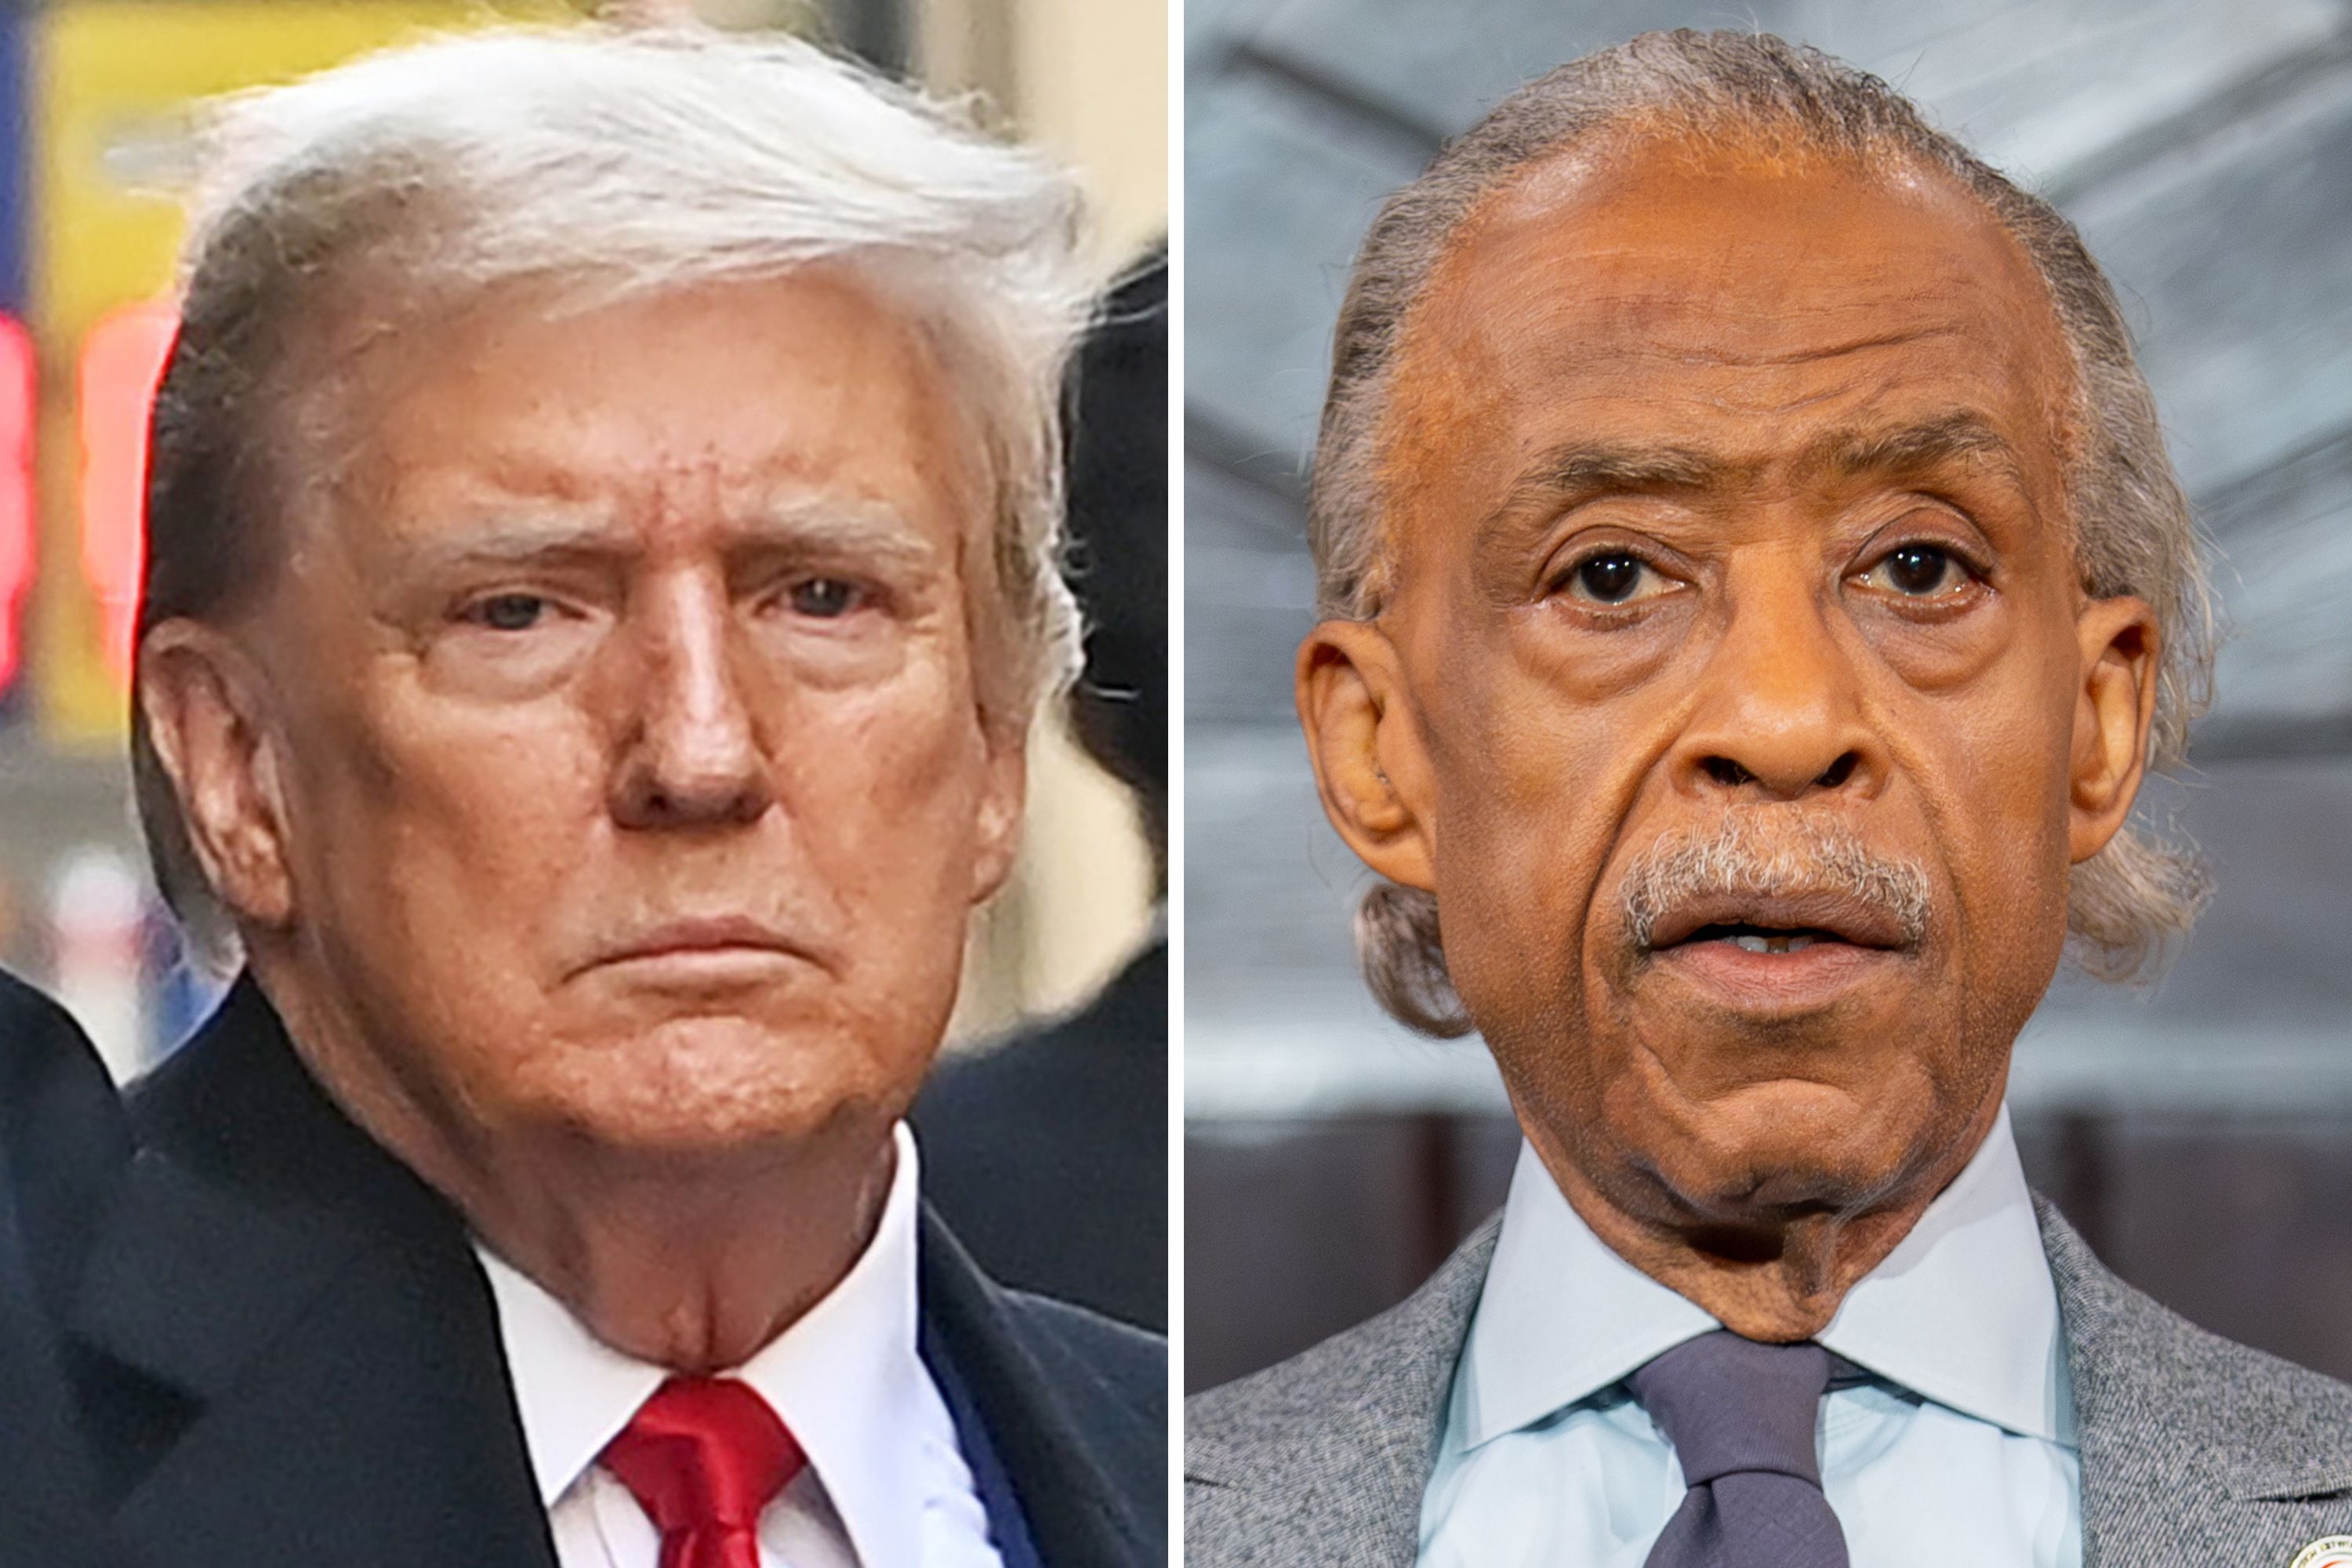 donald trump bible is 'spit in the face' of christians: rev. al sharpton